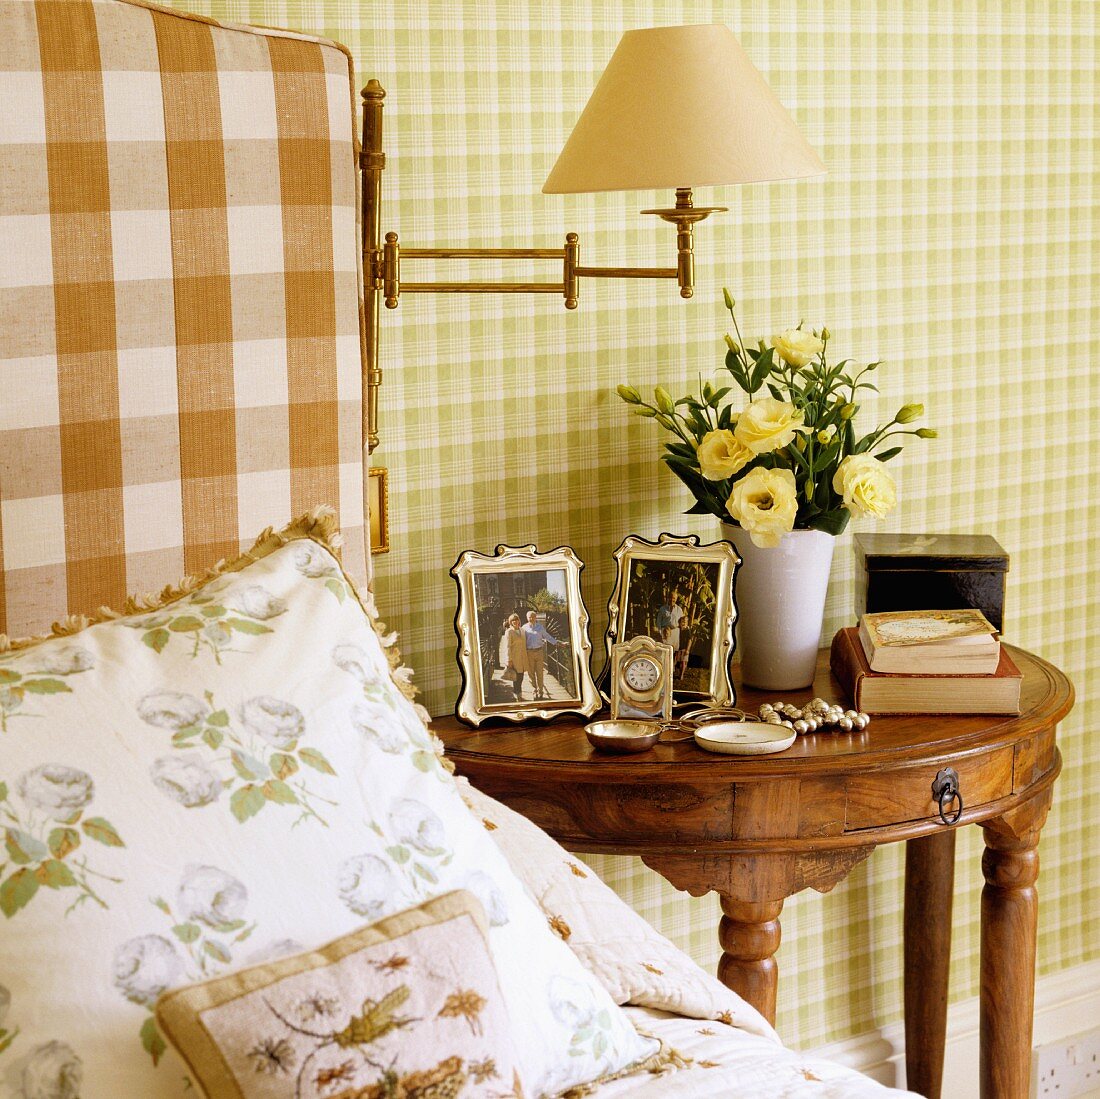 Scatter cushions on bed next to antique, semi-circular bedside table in exotic wood against wall with green checked wallpaper